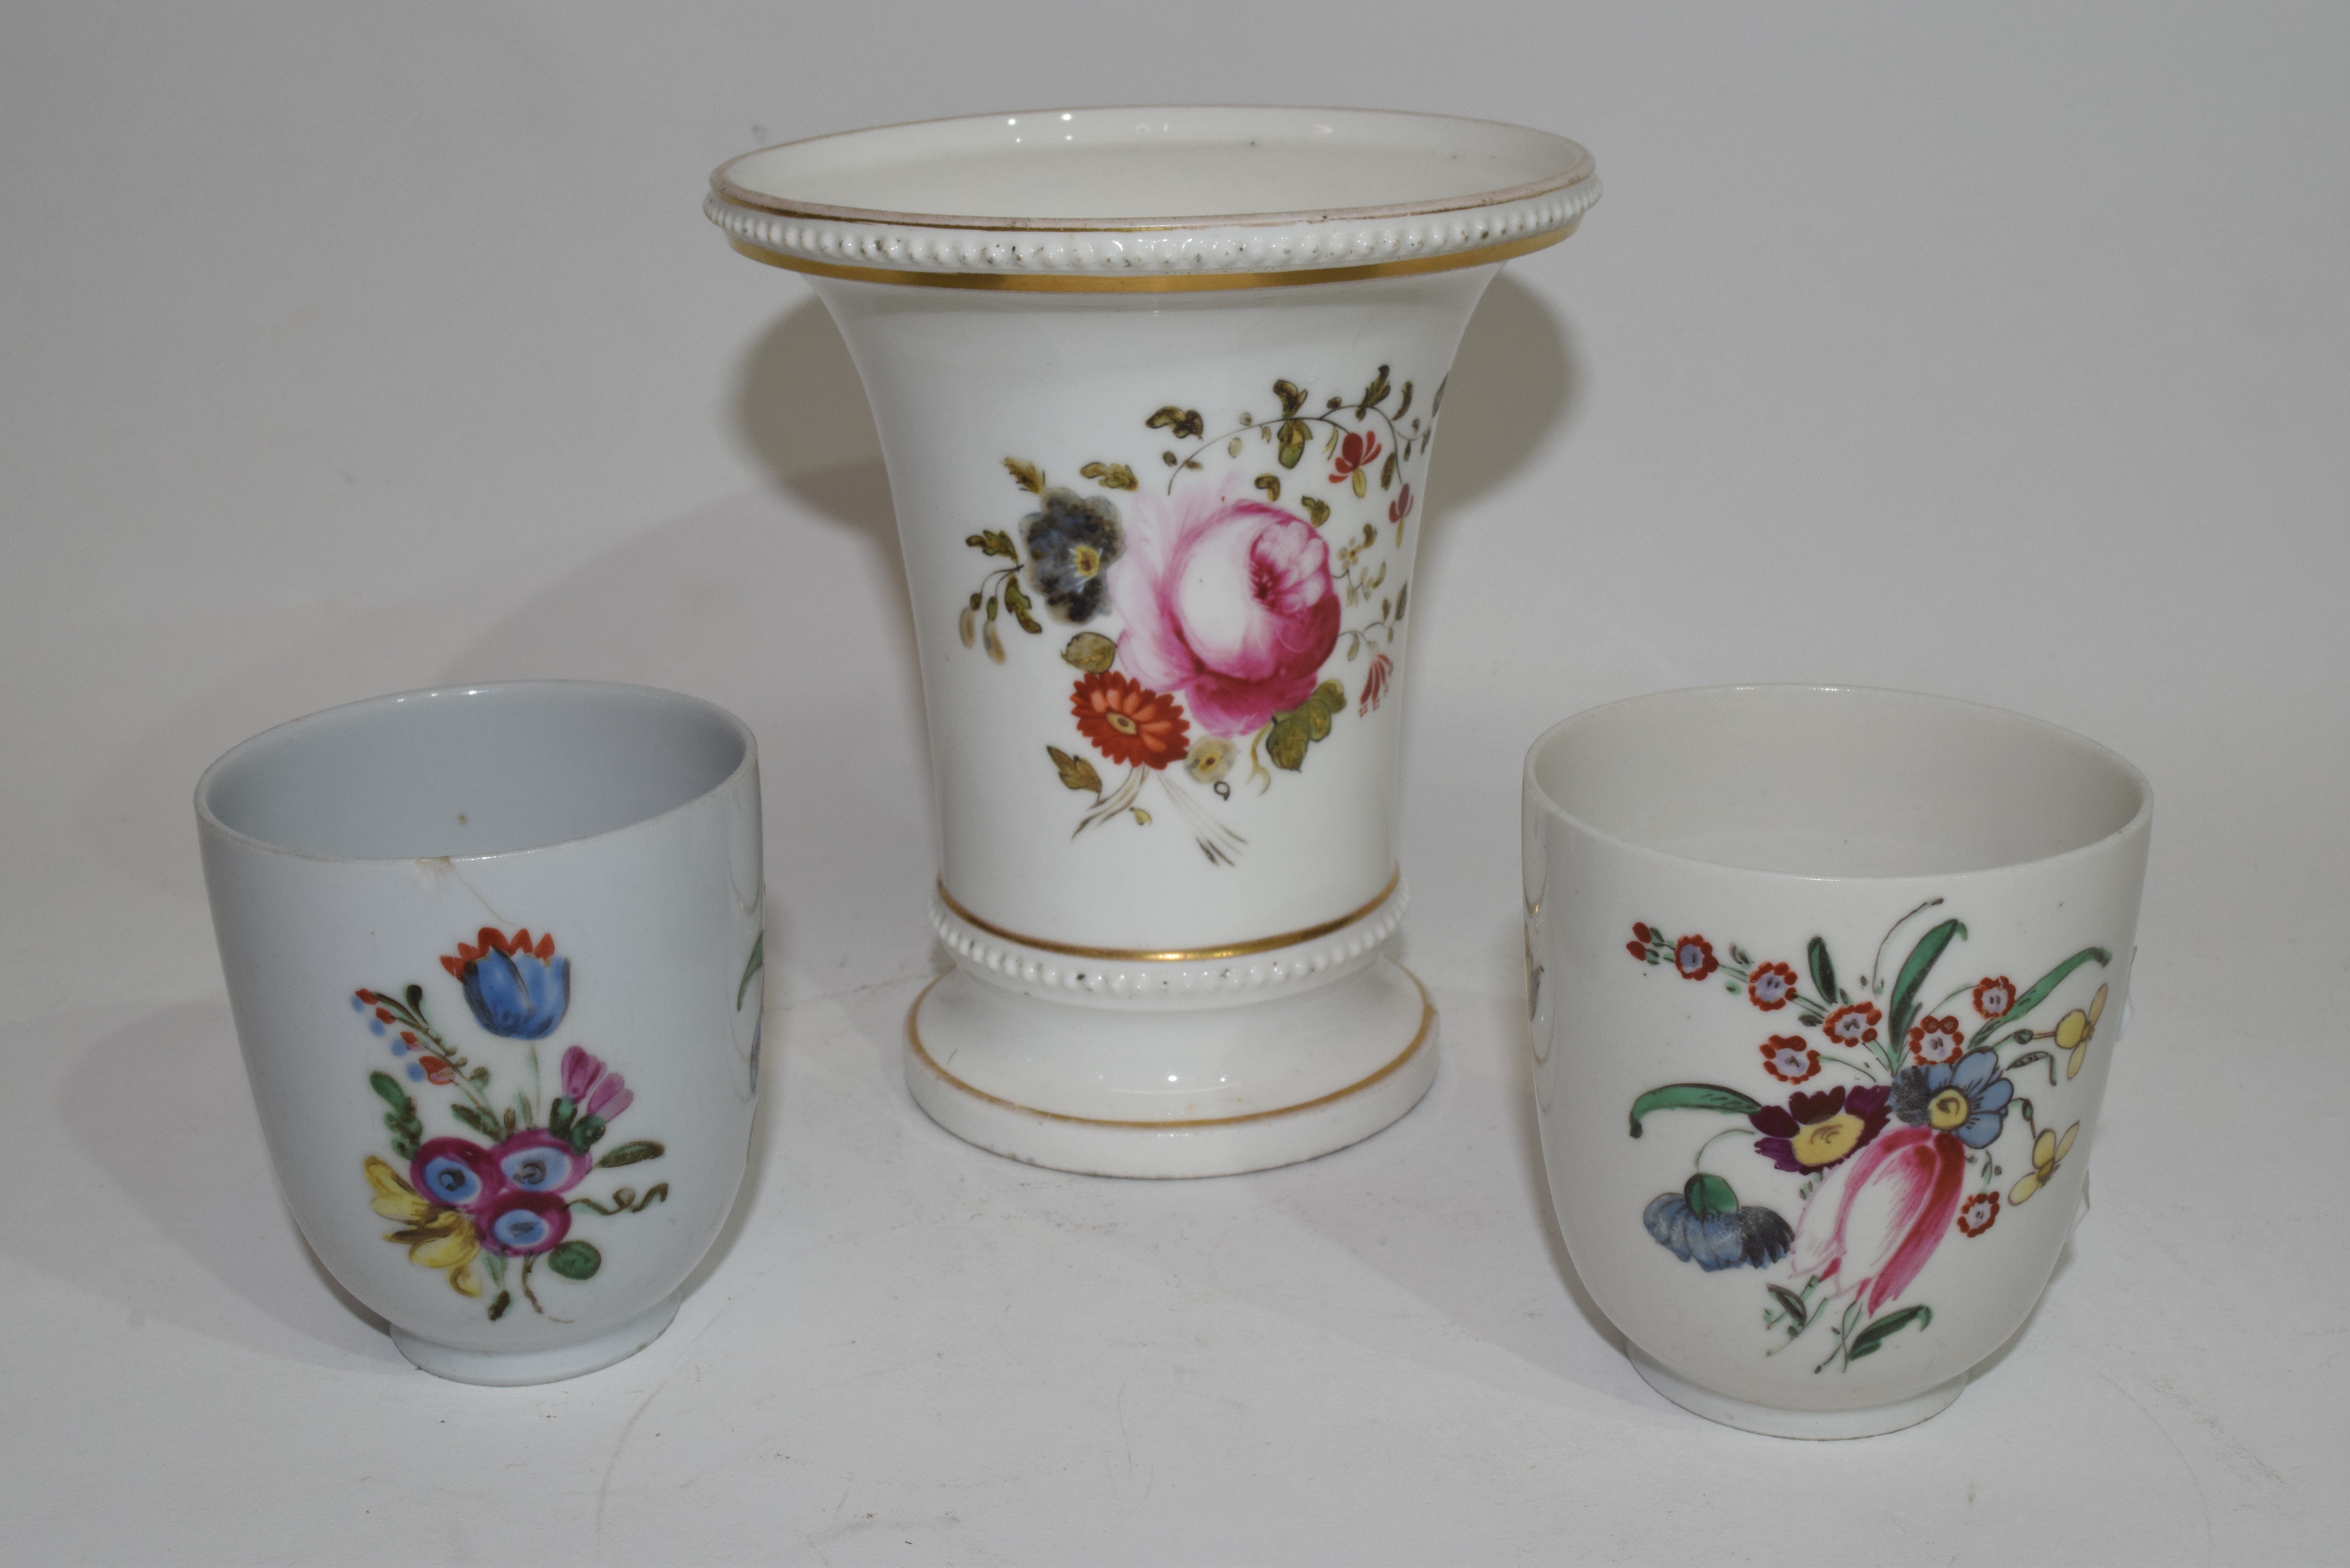 19th century English porcelain beaker vase, probably Spode, decorated with floral sprays, together